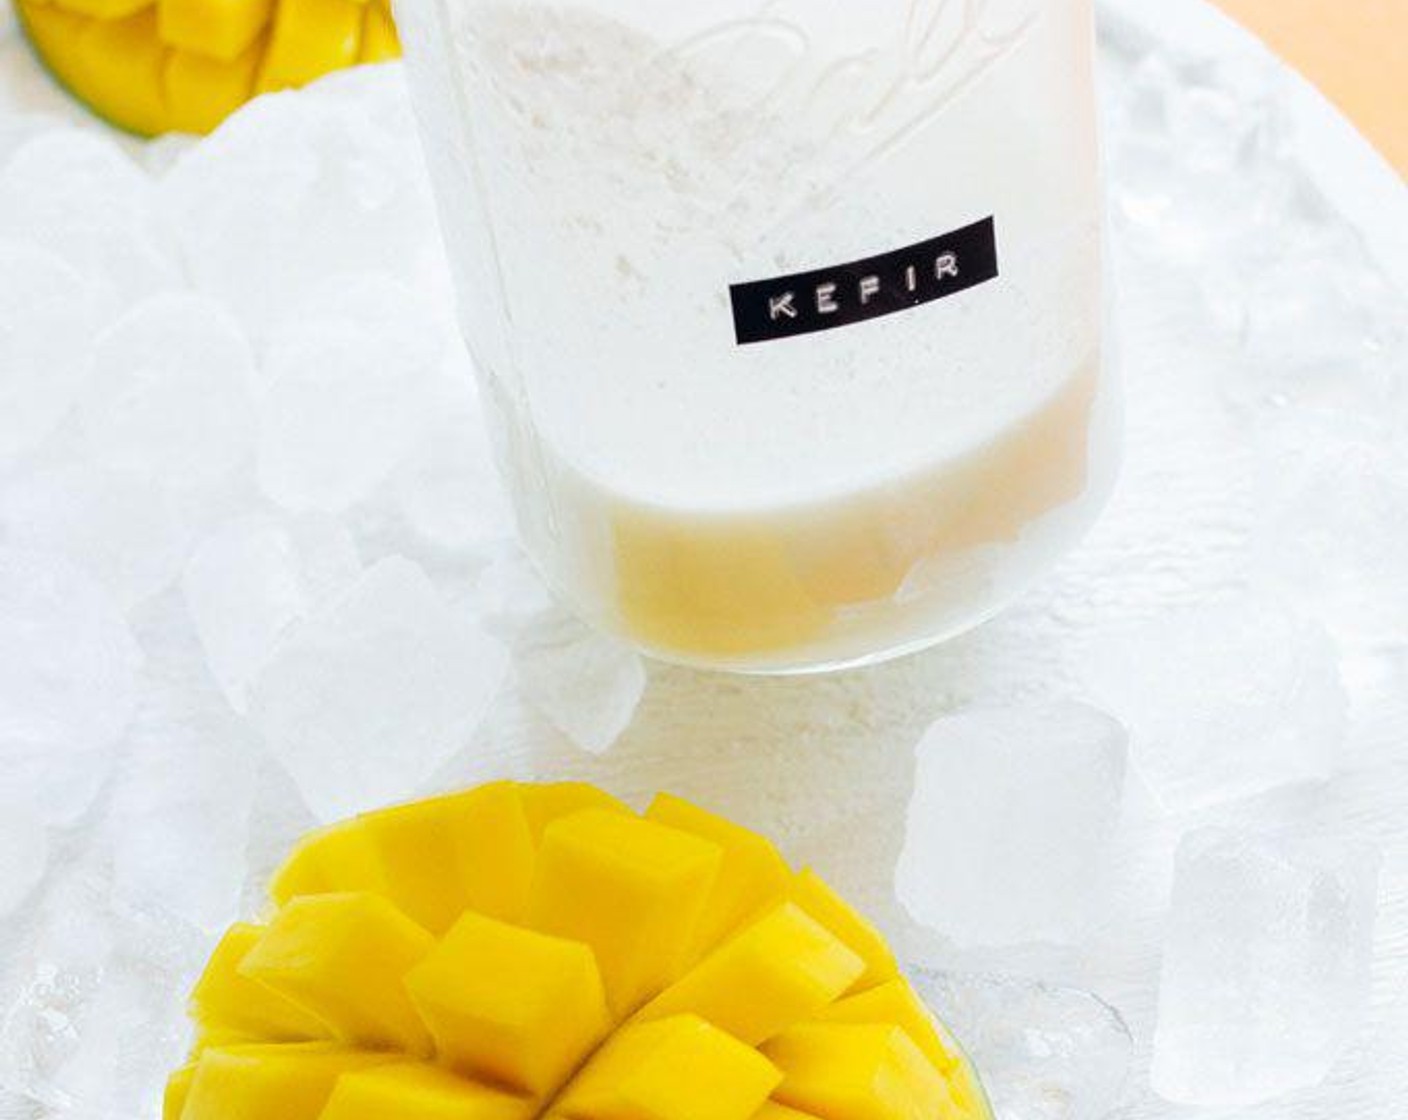 step 1 Combine Milk Kefir (1 1/4 cups), Mango (1 cup) and Honey (2 Tbsp) in a blender until smooth.